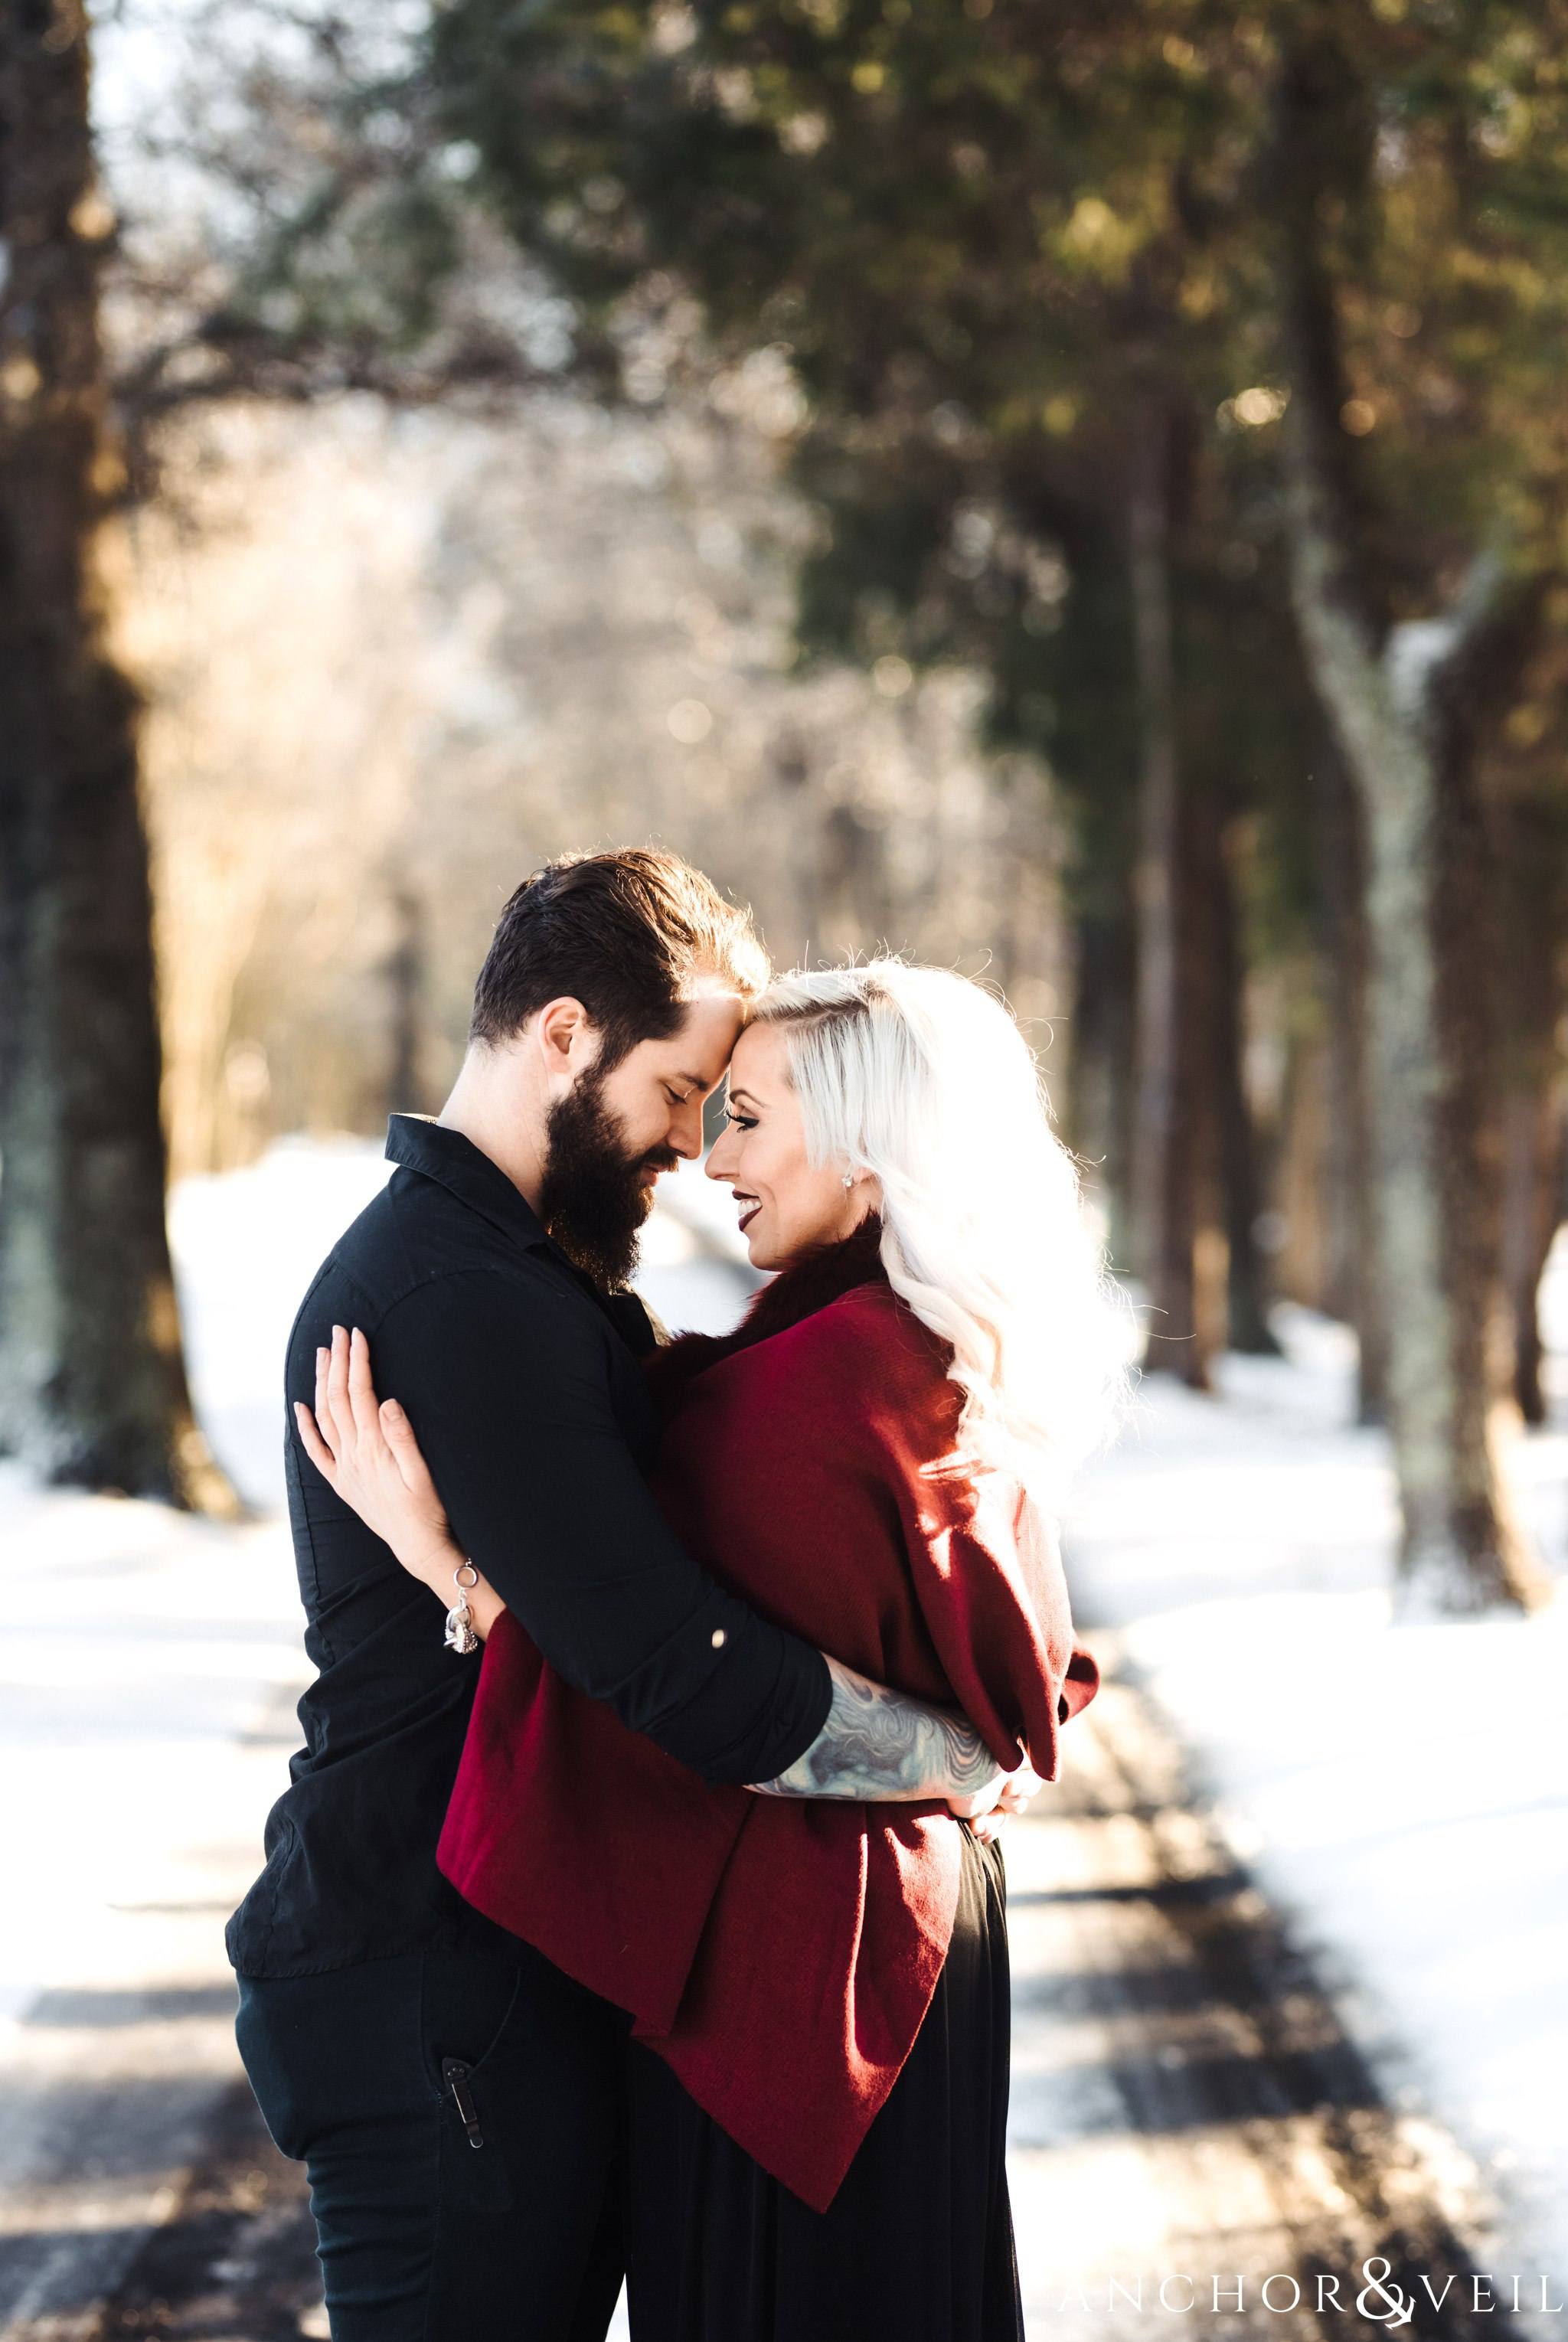 foreheards together holding tight during their charlotte snow engagement session